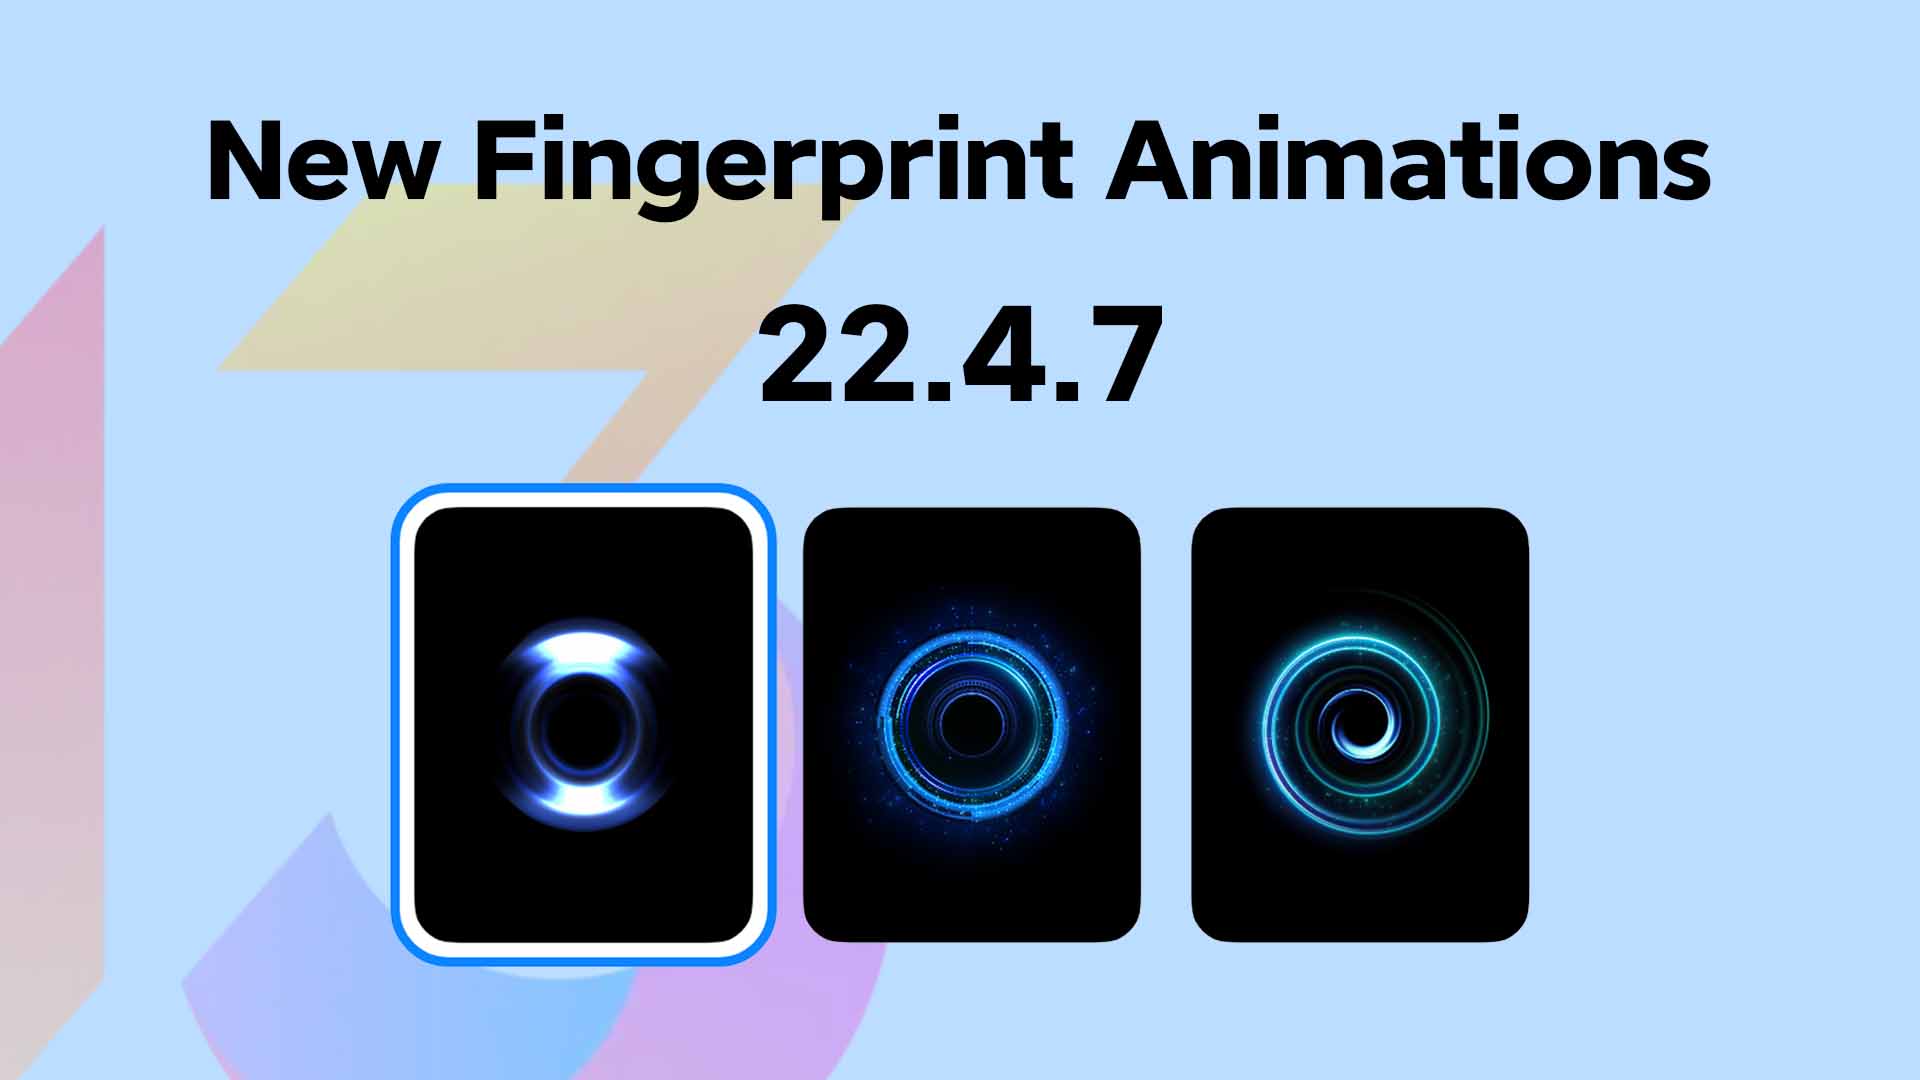 MIUI 13 Beta 22.4.7 Update brings new Fingerprint Animation for Xiaomi Devices